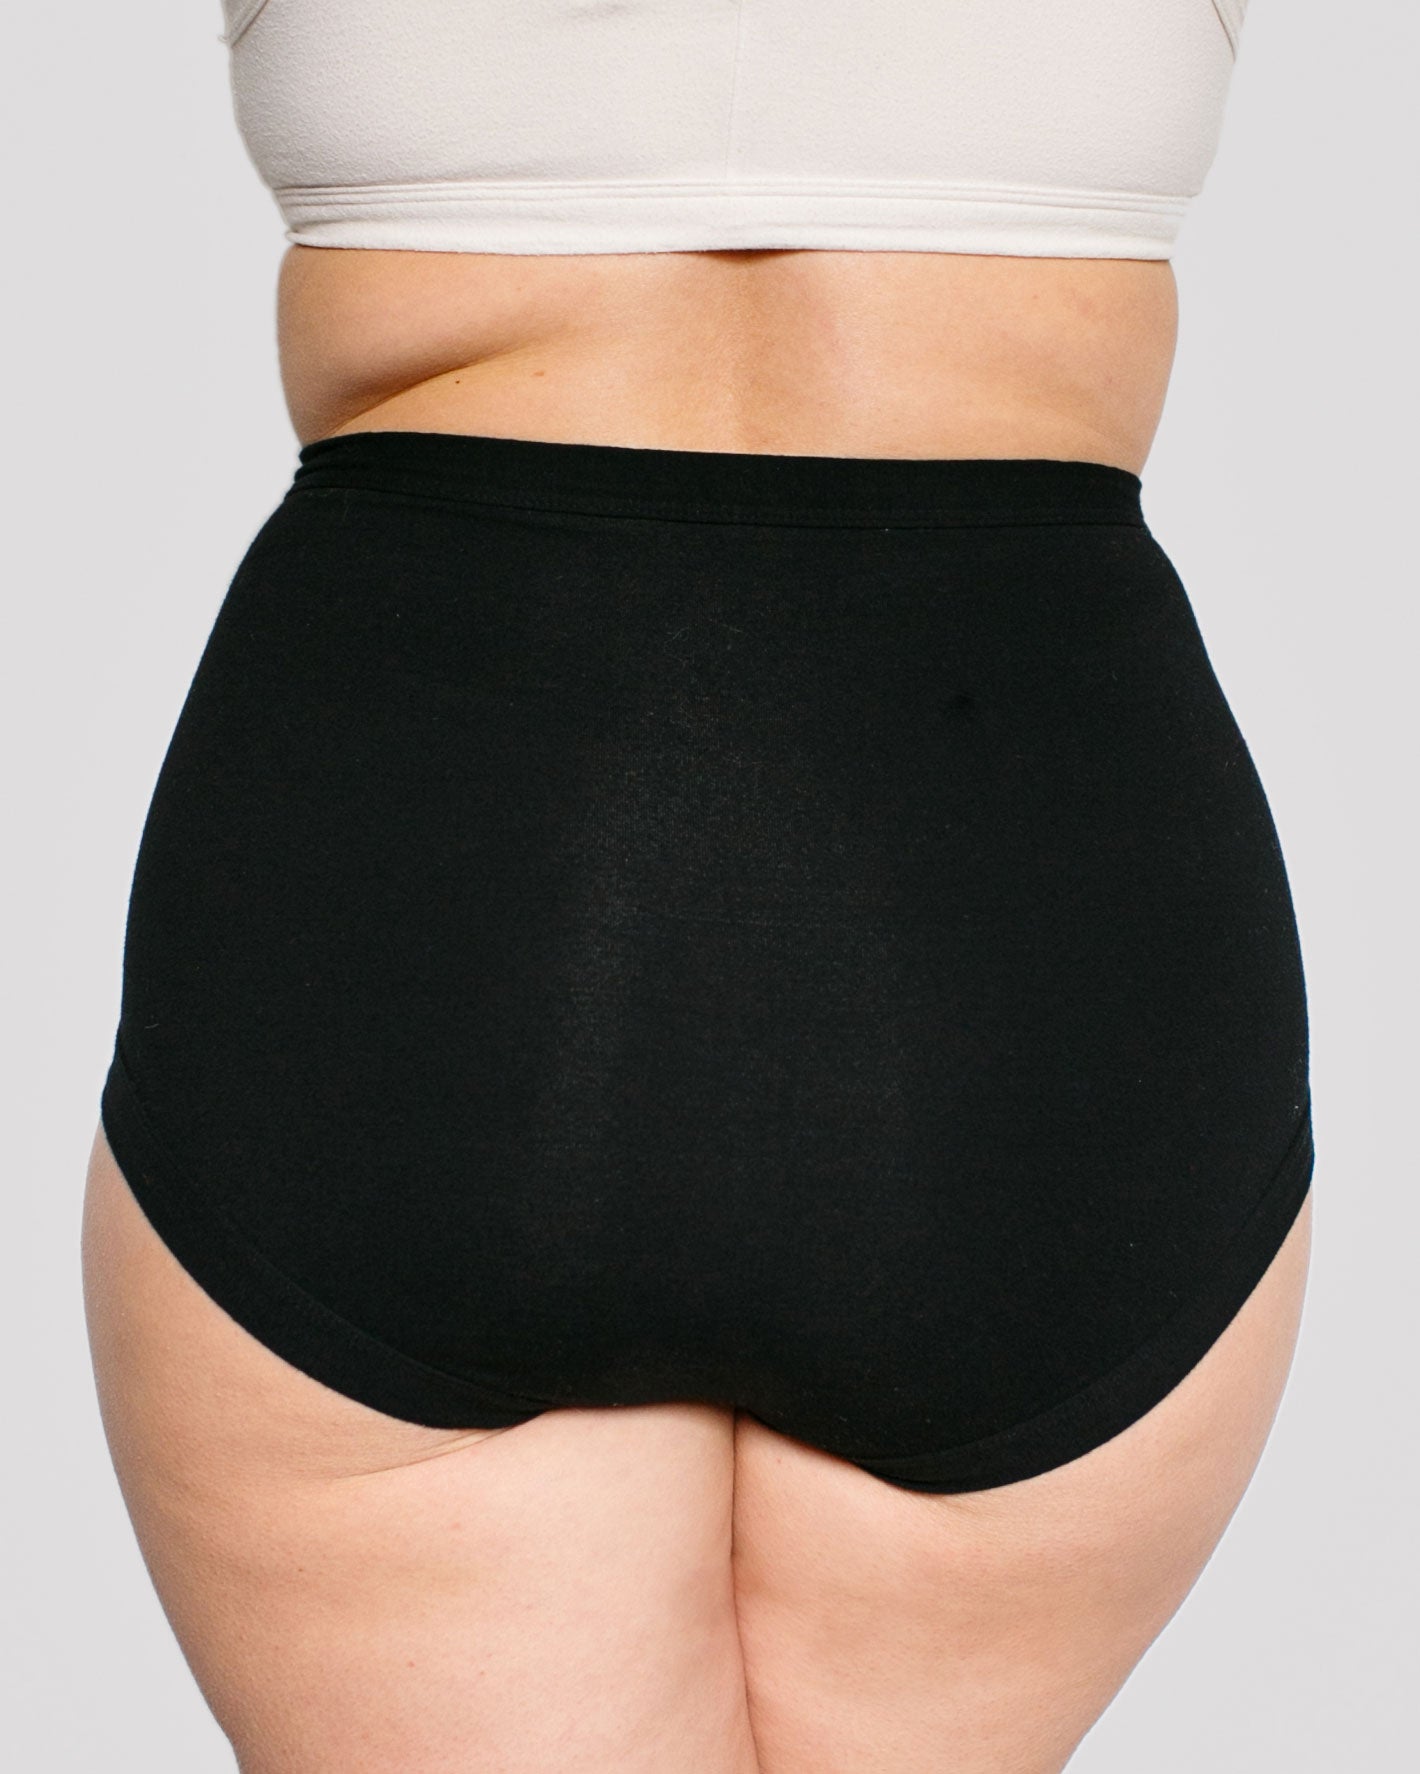 Fit photo from the back of Thunderpants organic cotton Sky Rise style underwear in Plain Black, showing a wedgie-free bum, on a model.